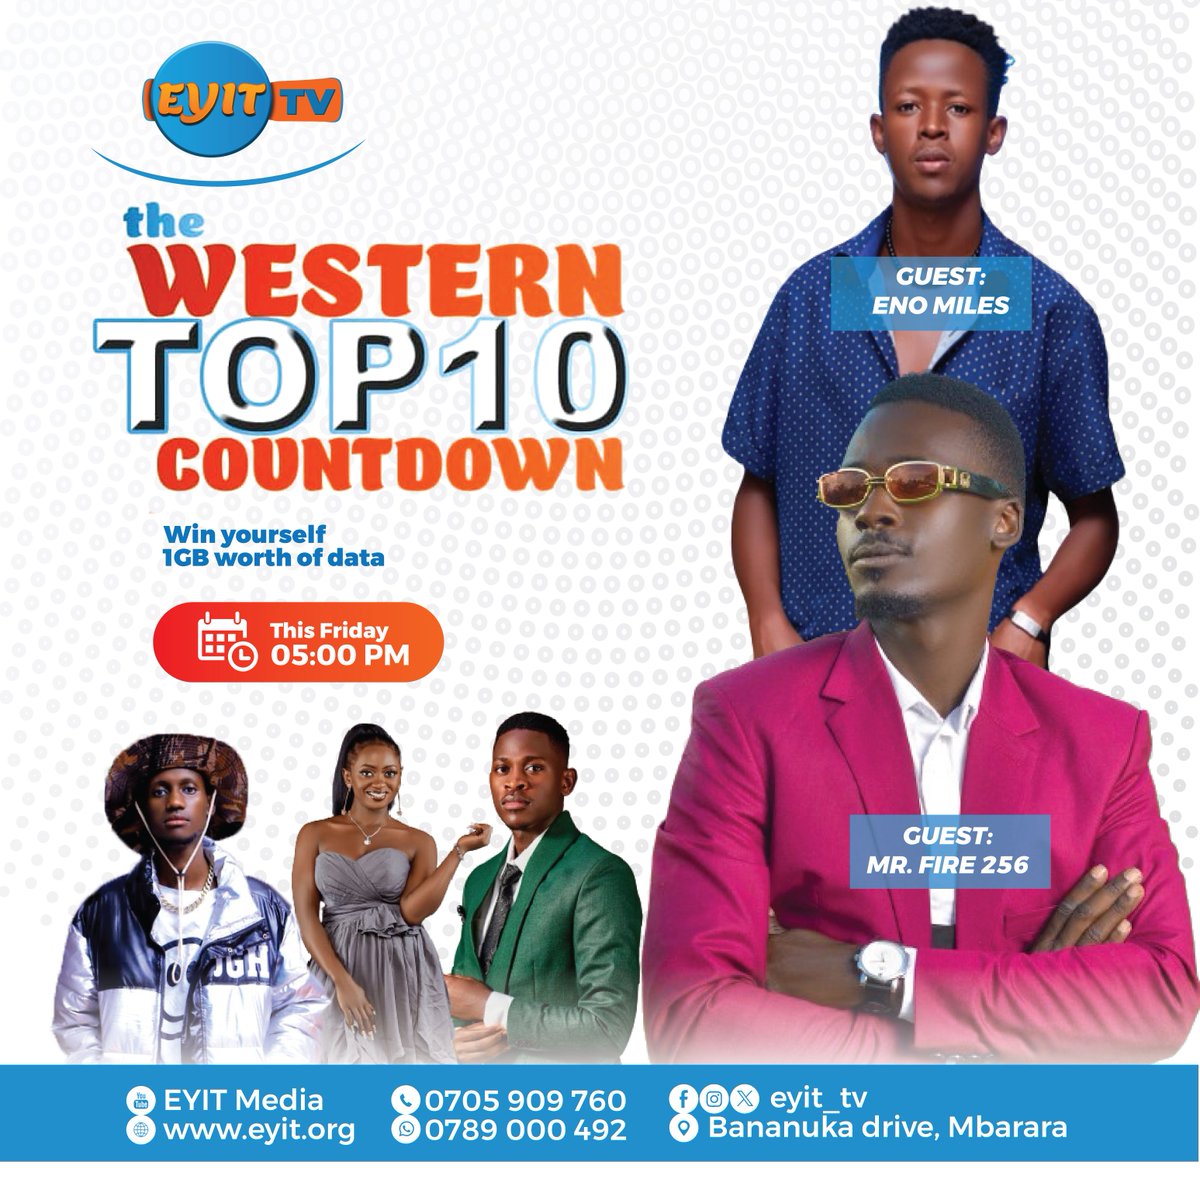 🎸🤠 Get ready to boot-scoot into the weekend with the BIGGEST #WesternTopTenCountdown yet! 🎤🌟 This Friday at 5 PM, join @glady_heather , @Ssonkopromotion , and @HusseinAkugi as we amp up the fun with TWO special guests! 🎶✨ Don’t miss out—tune in and turn up the volume🔥